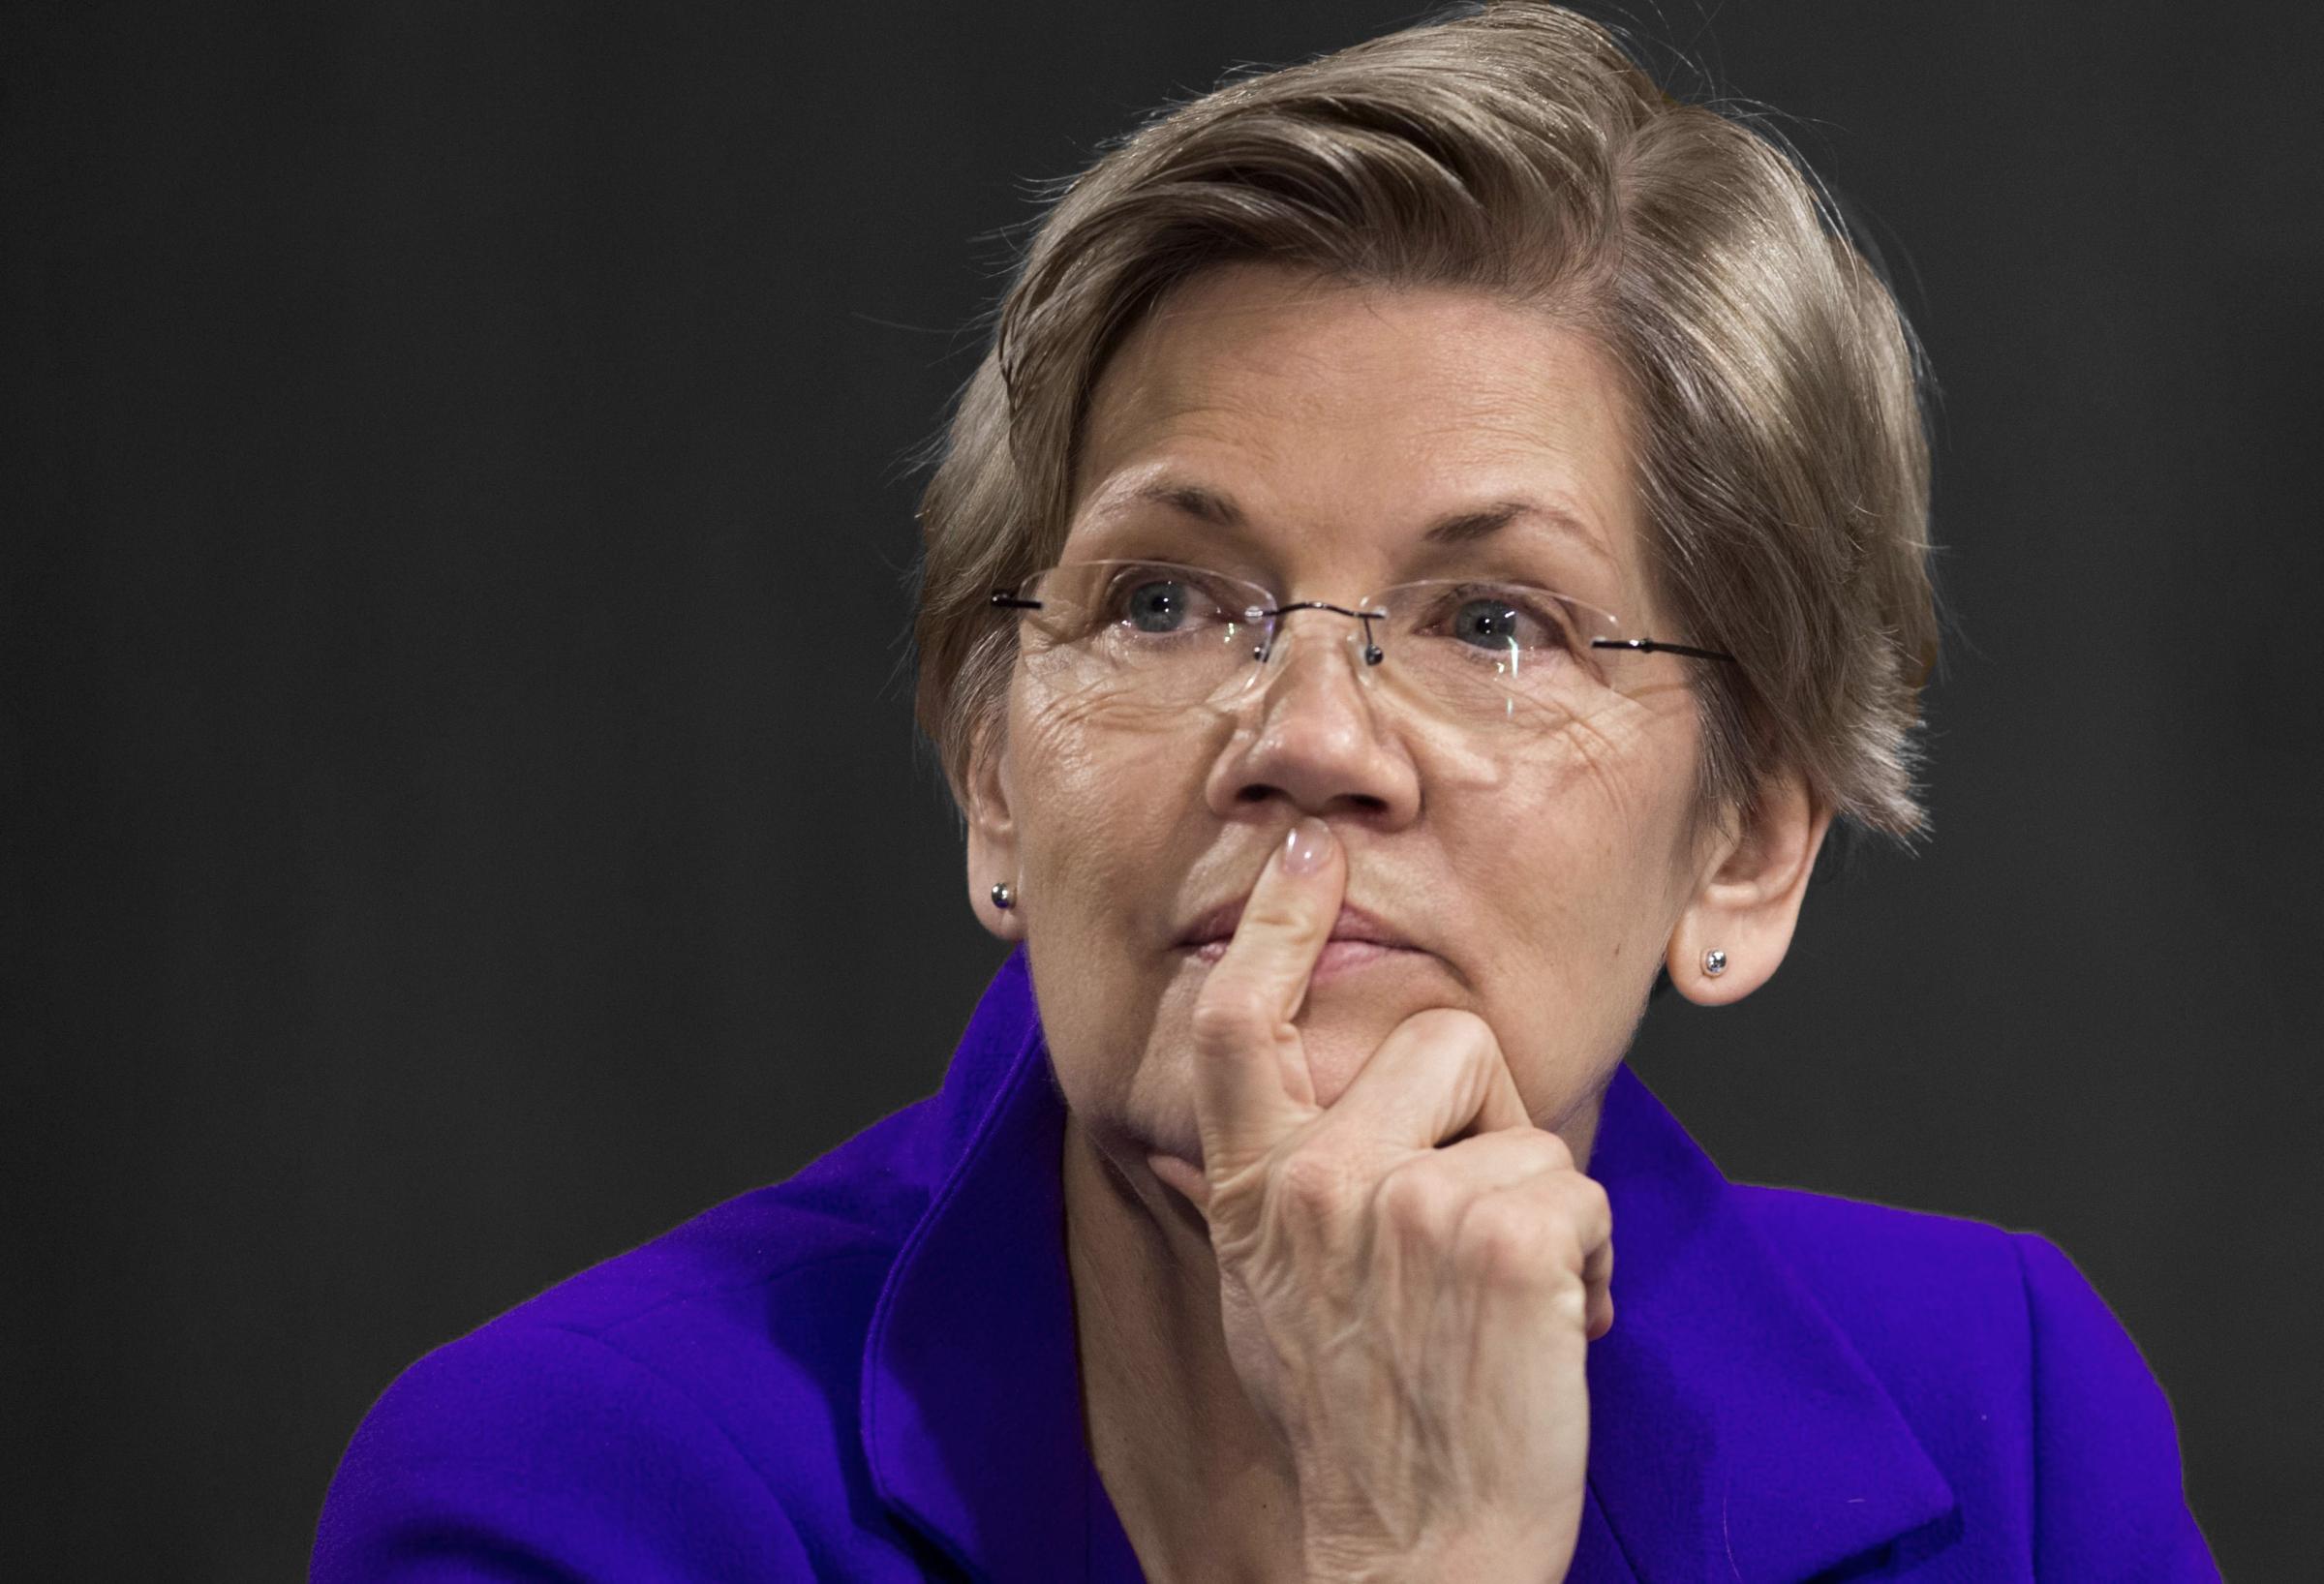 Elizabeth Warren The Massachusetts Senator is a one-woman think tank for Democratic policymaking. Still in her first term, she has a national following that catapults her proposals into the limelight, even though few of them will become law in the Republican-controlled Congress.